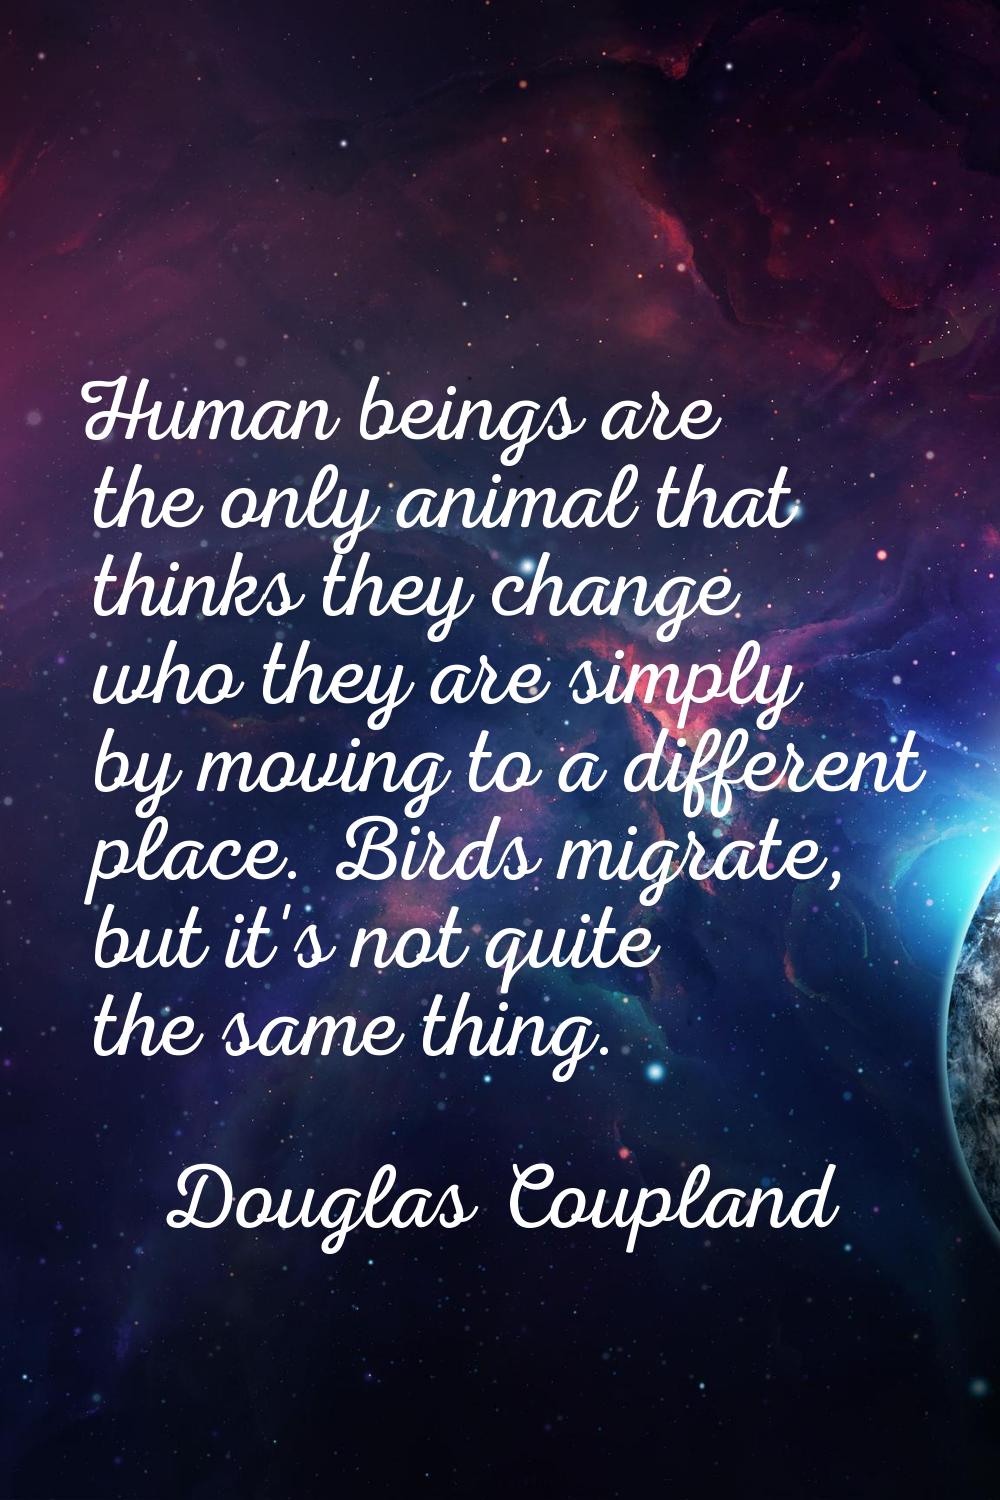 Human beings are the only animal that thinks they change who they are simply by moving to a differe